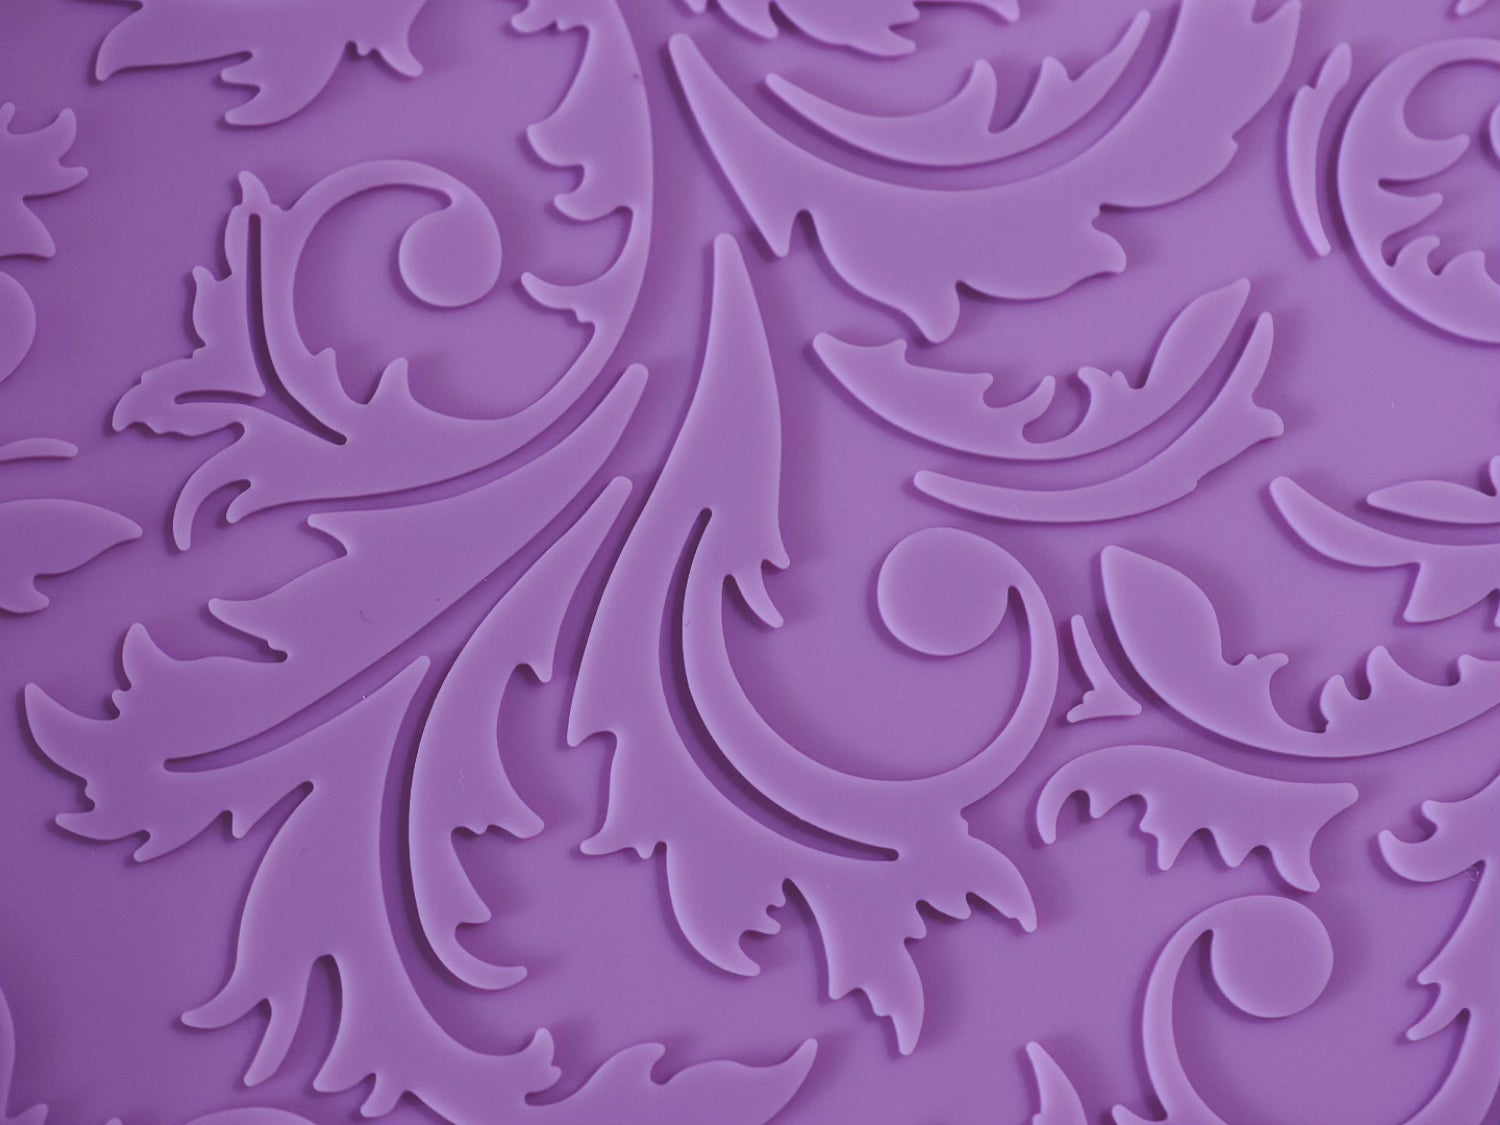 A close up view of the texture of the purple floral filigree mat.